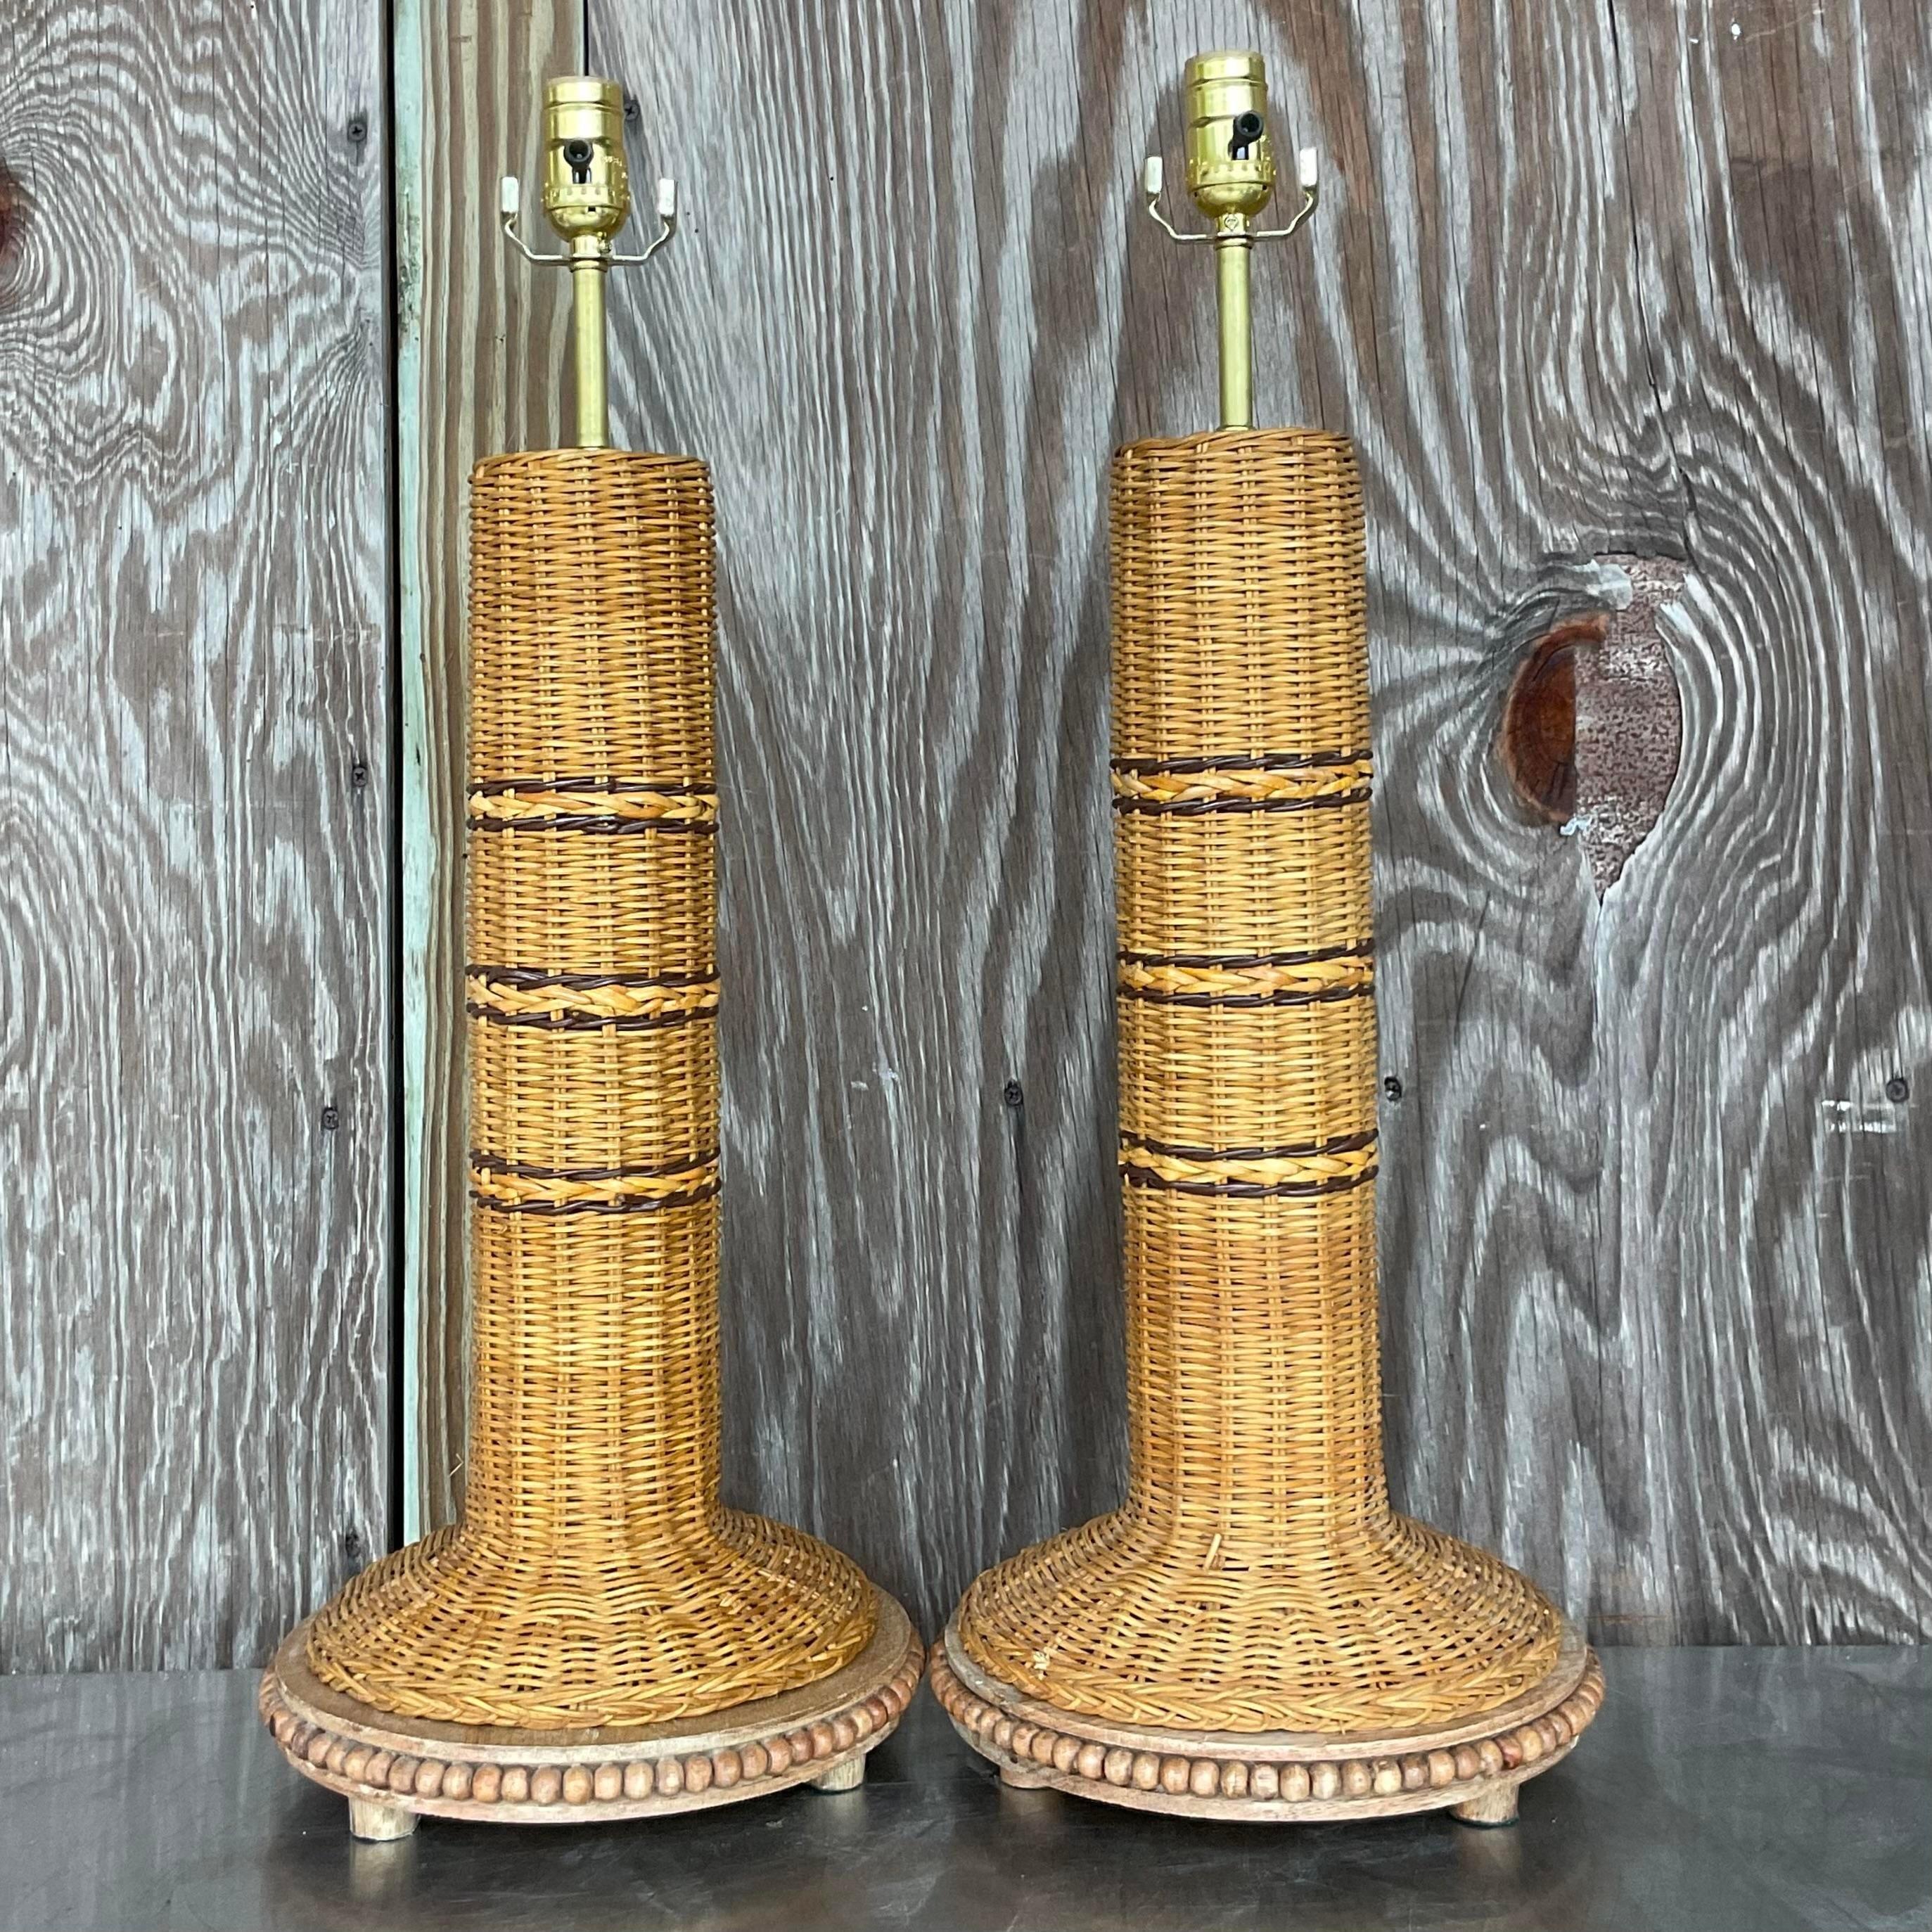 Vintage Coastal Woven Rattan Table Lamps - a Pair In Good Condition For Sale In west palm beach, FL